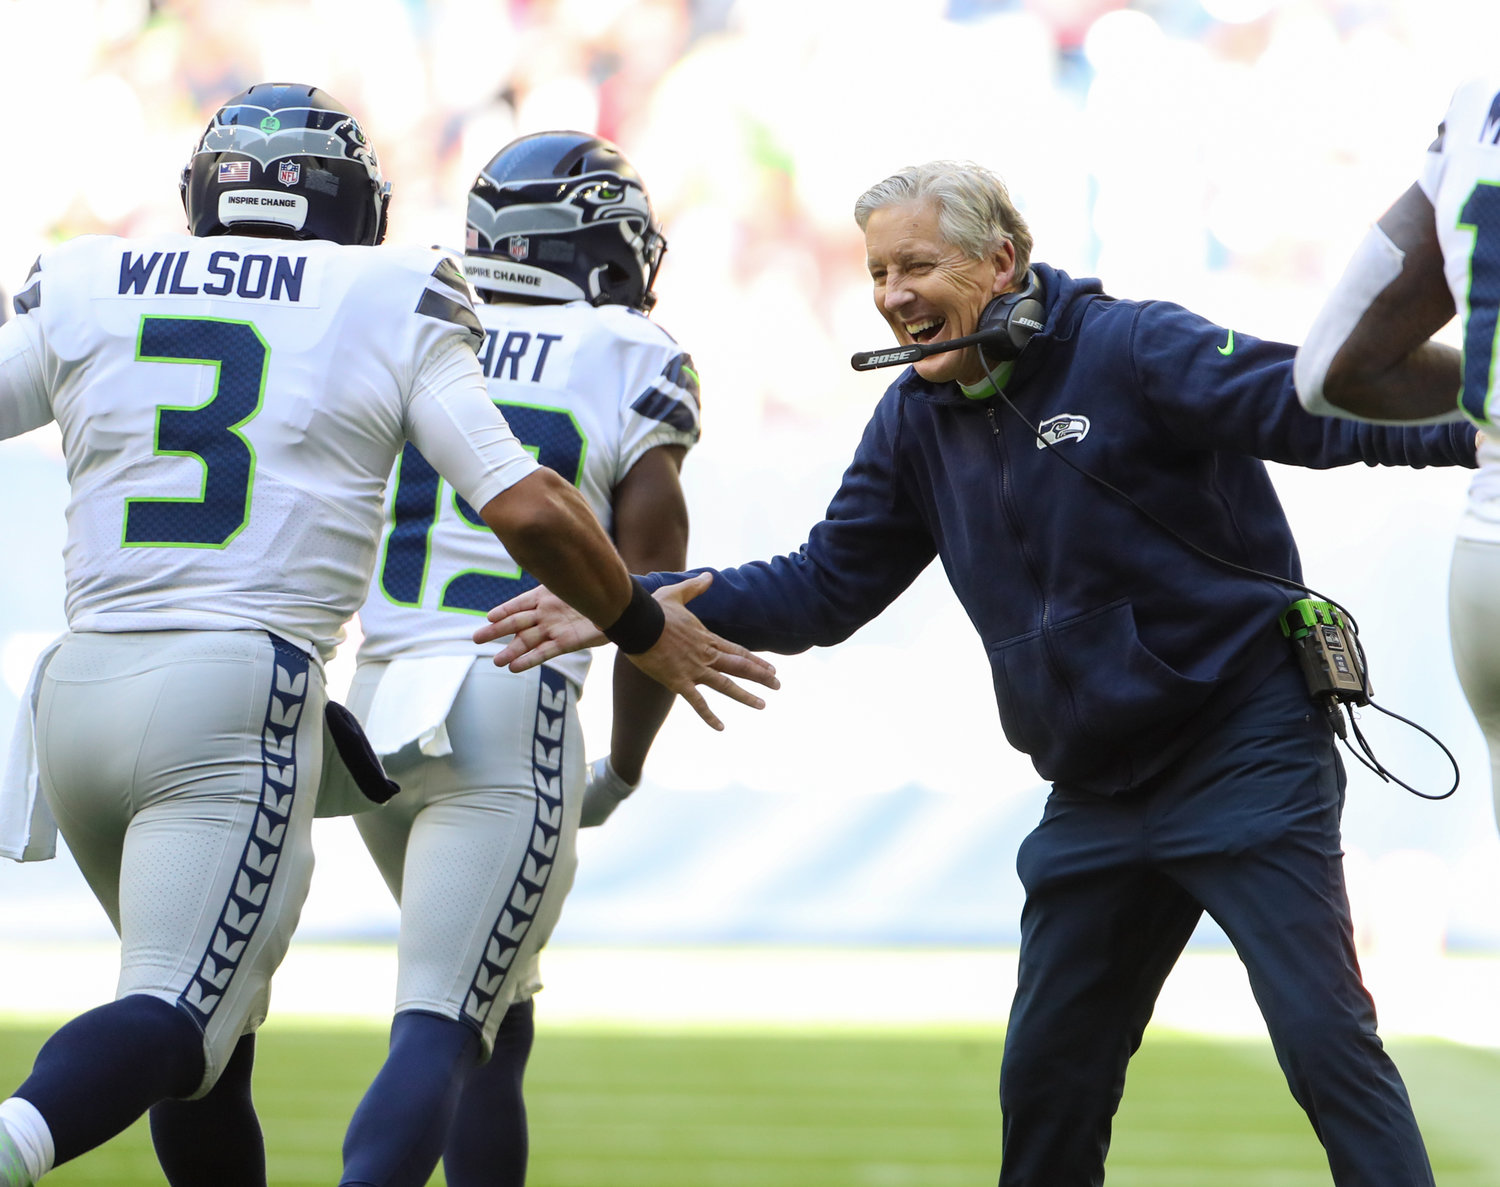 Seattle Seahawks head coach Pete Carroll congratulates quarterback Russell Wilson (3) after a touchdown during the first half of an NFL game between the Seahawks and the Texans on December 12, 2021 in Houston, Texas.